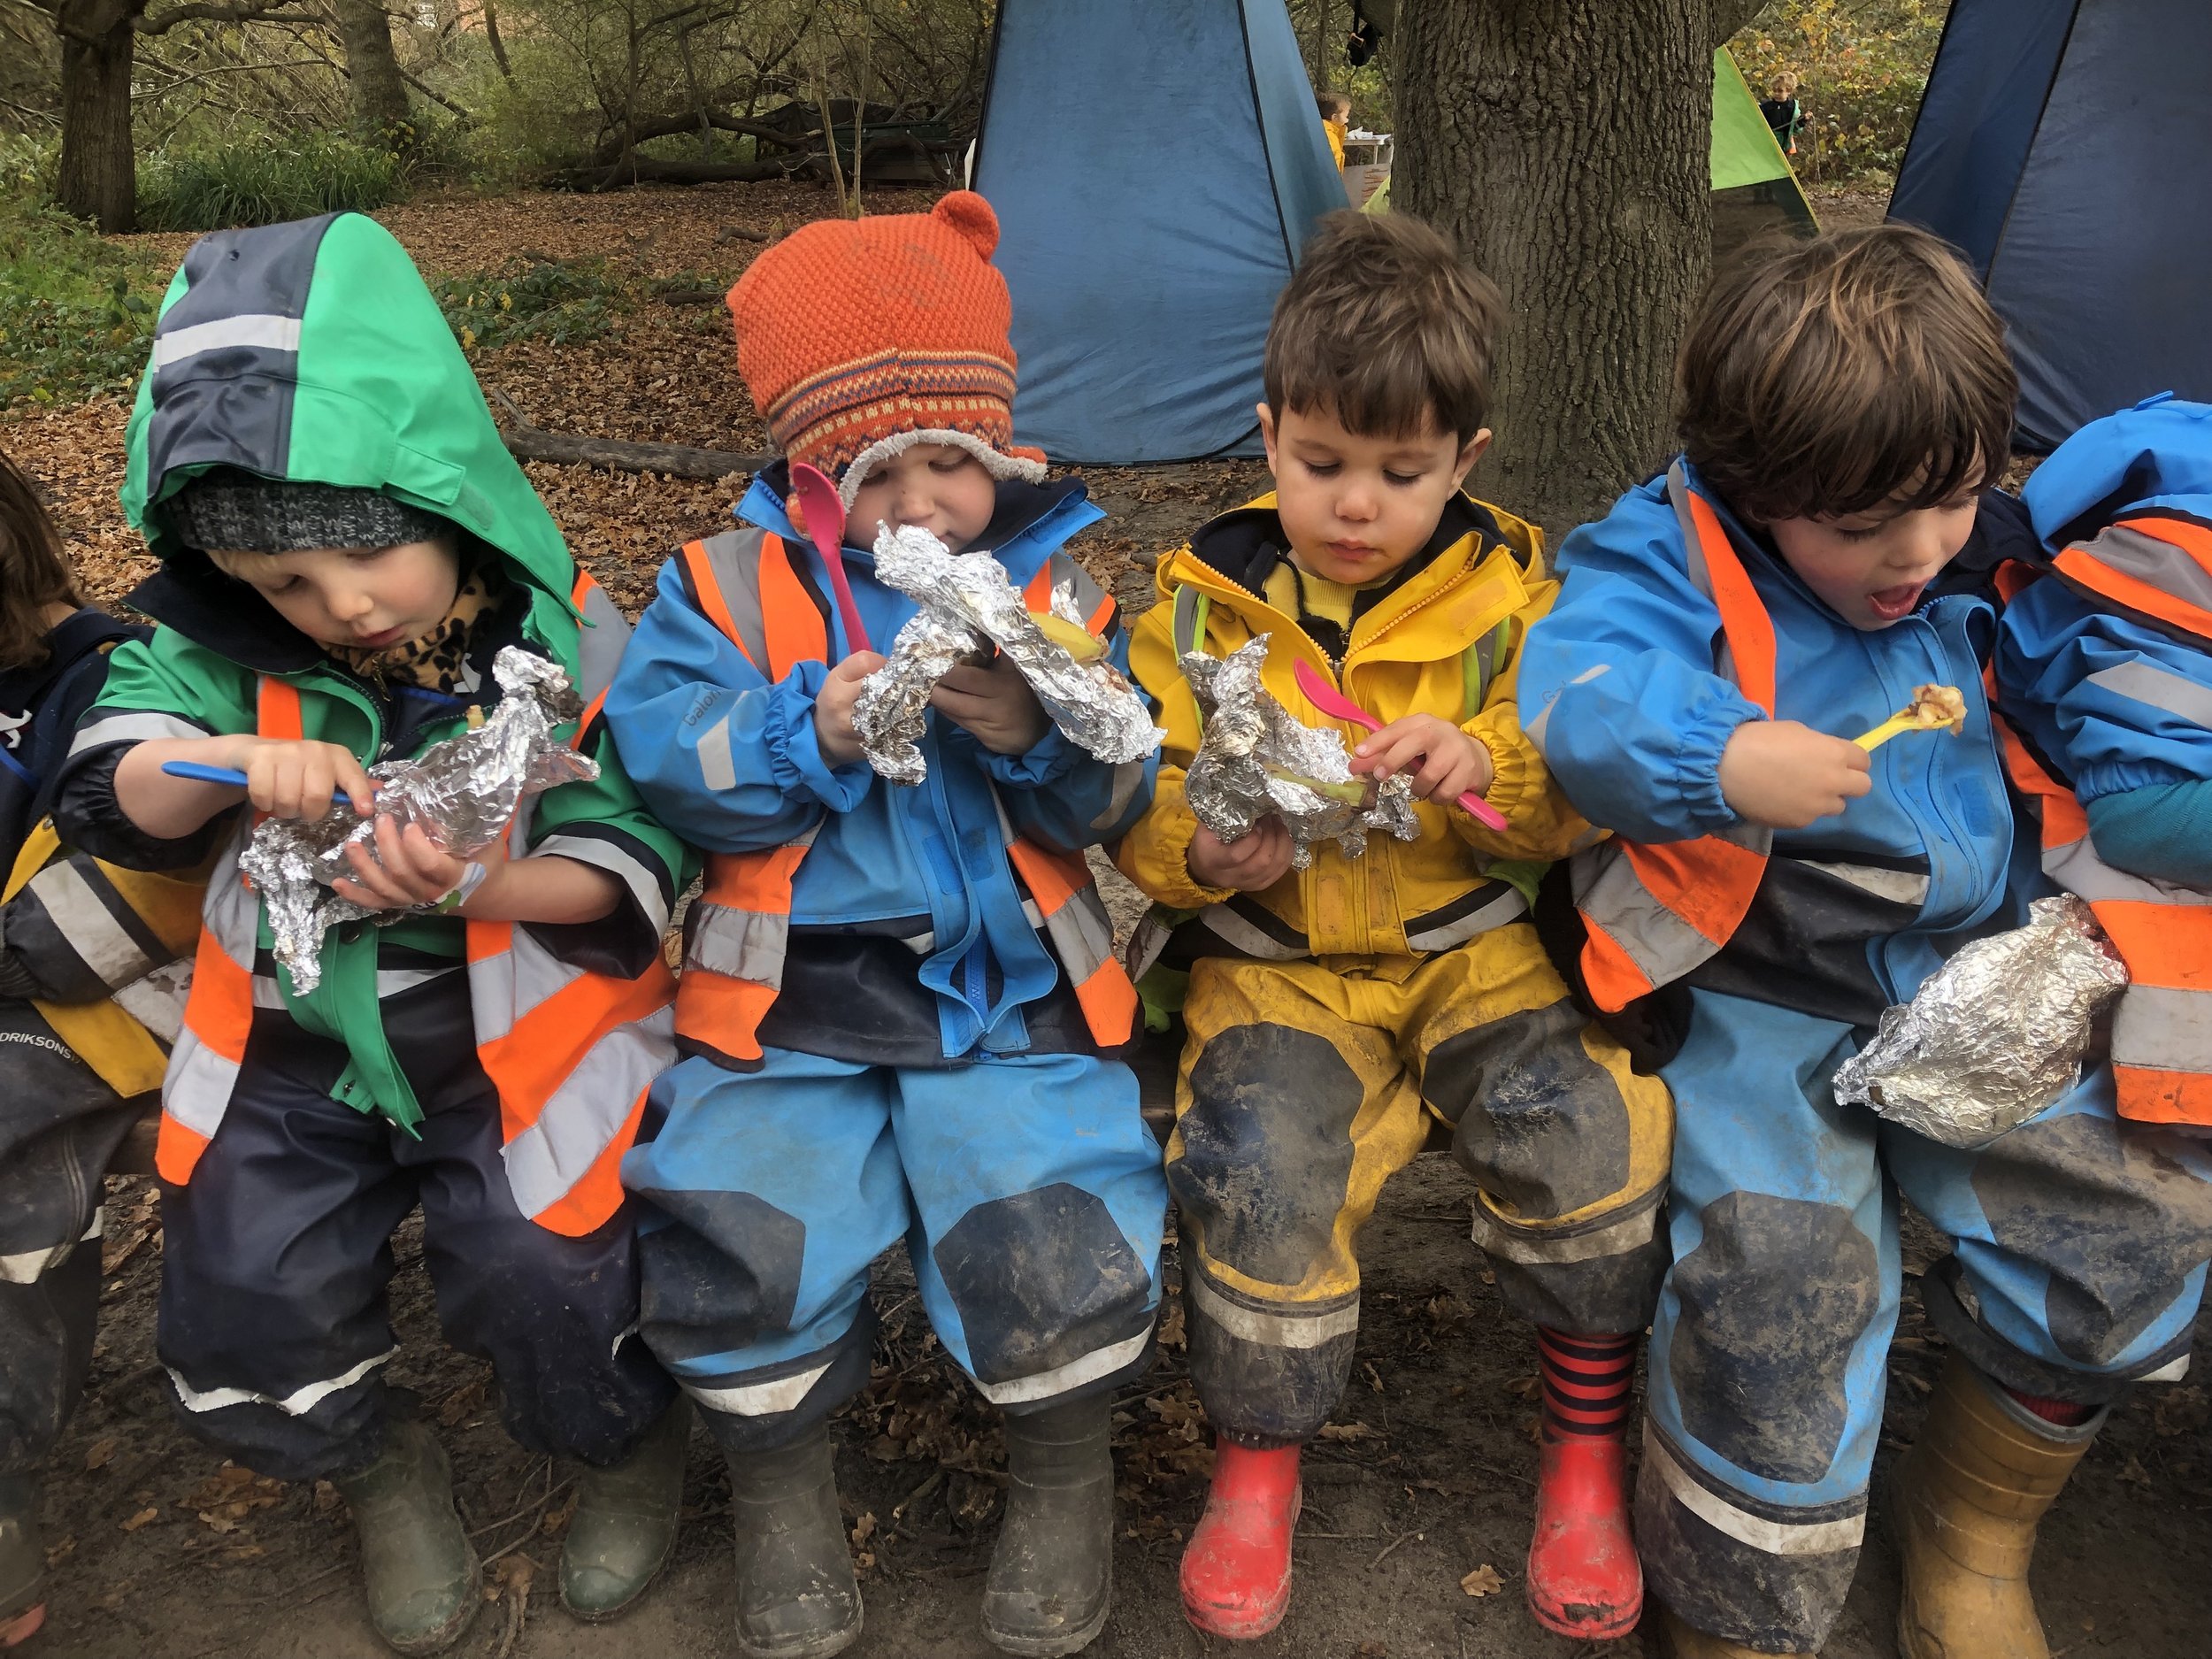 Children eating cooked bananas from the fire 2.jpg